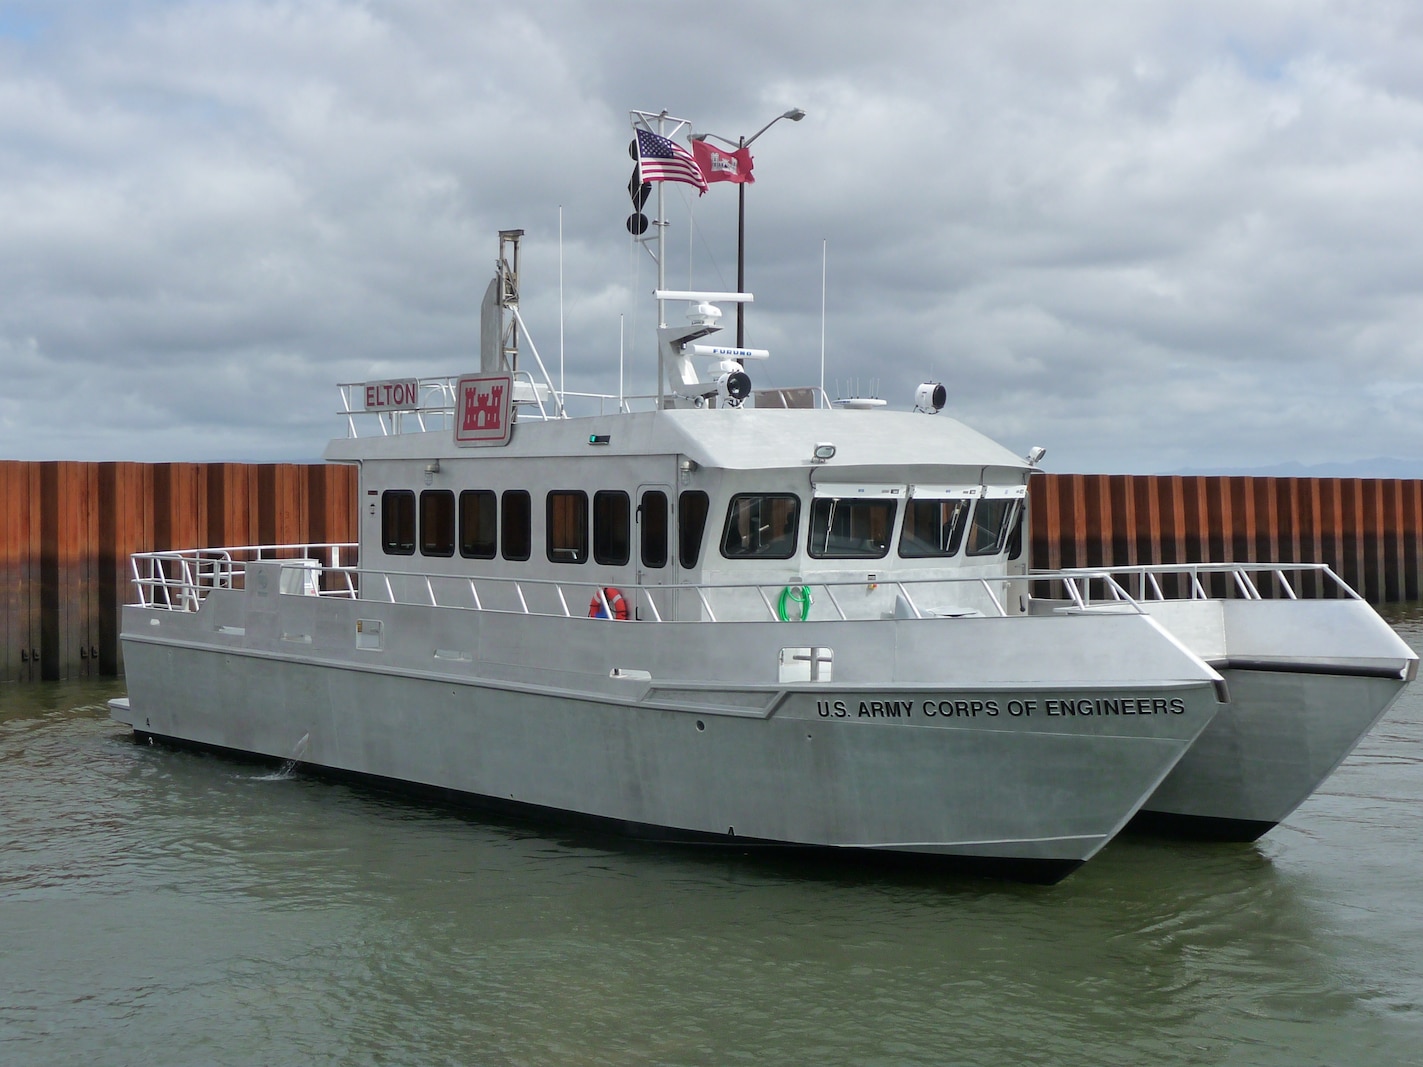 The USACE Marine Design Center managed the design and construction of the Survey Vessel ELTON on behalf of the USACE Portland District. 